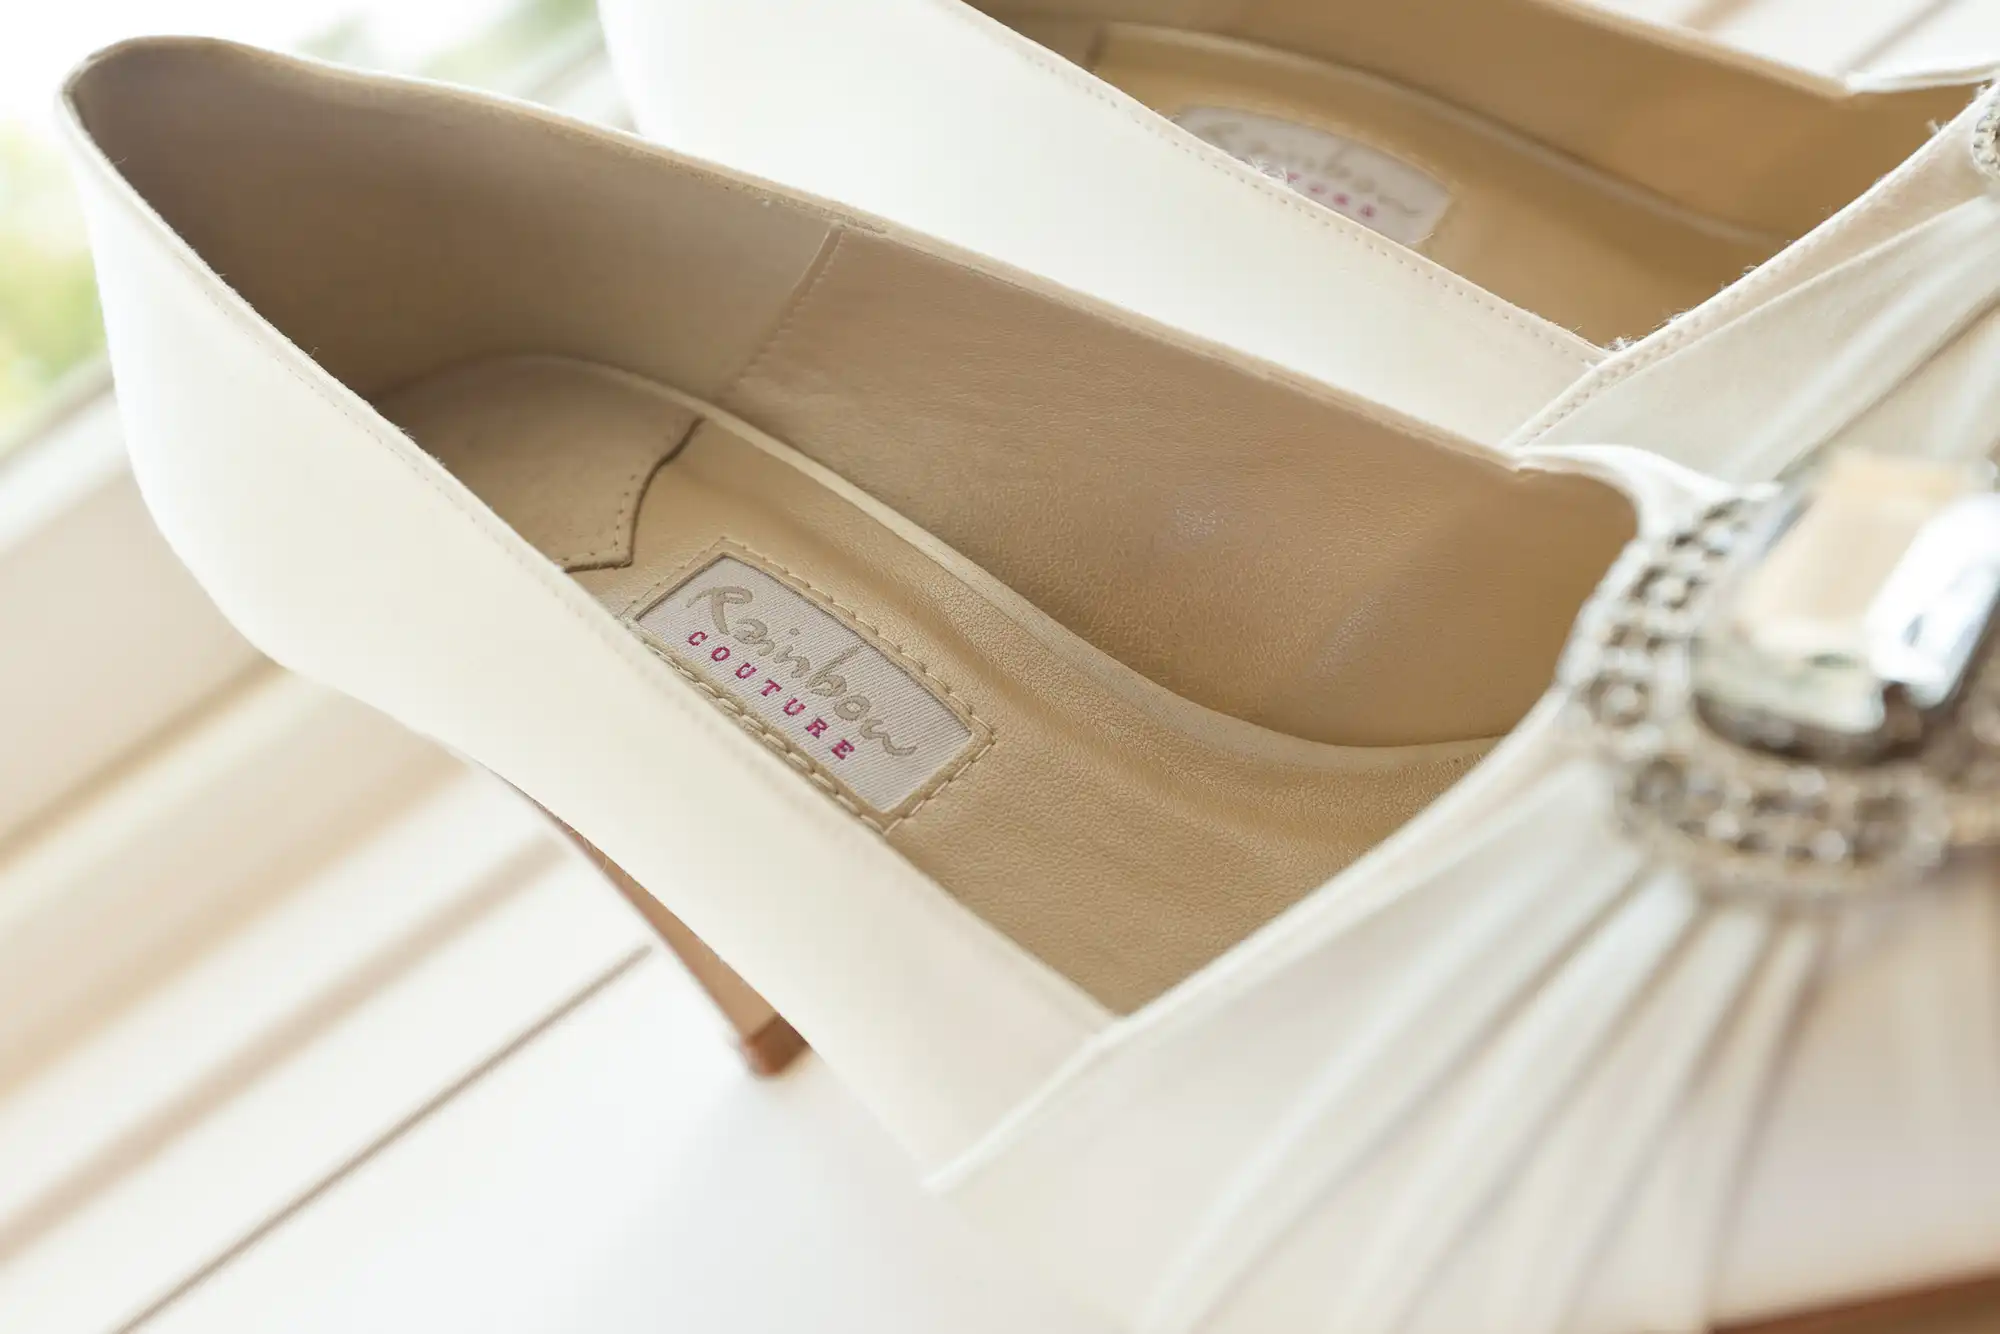 Close-up of elegant white high-heeled shoes with a label reading "rainbow couture" inside.